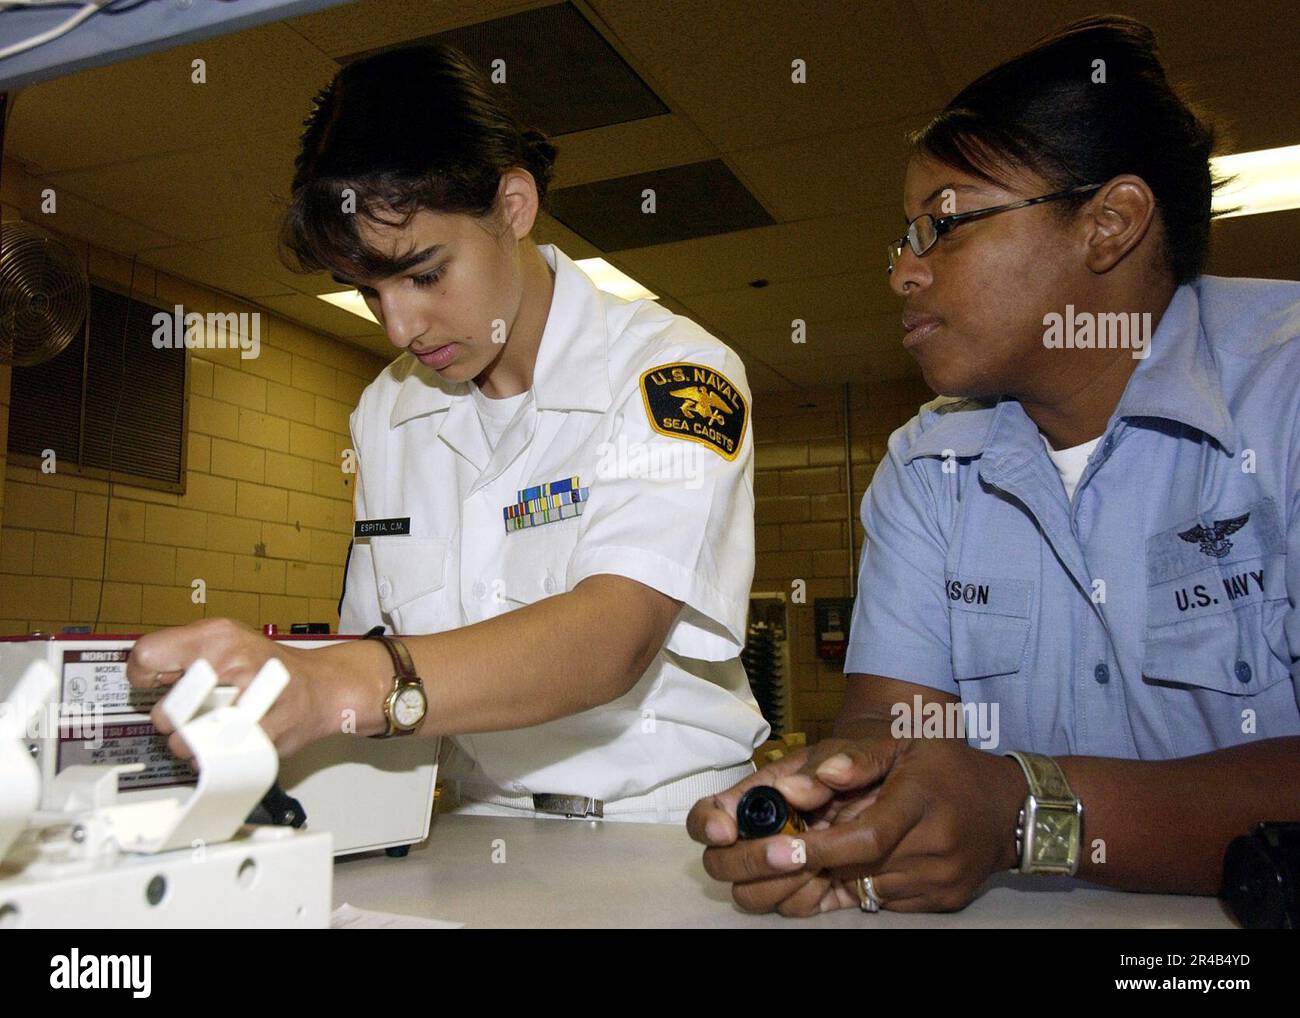 US Navy Photographer's Mate 1st Class Aviation Warfare right, instructs U.S. Naval Sea Cadet Seaman as she learns the basics of developing photographic film Stock Photo